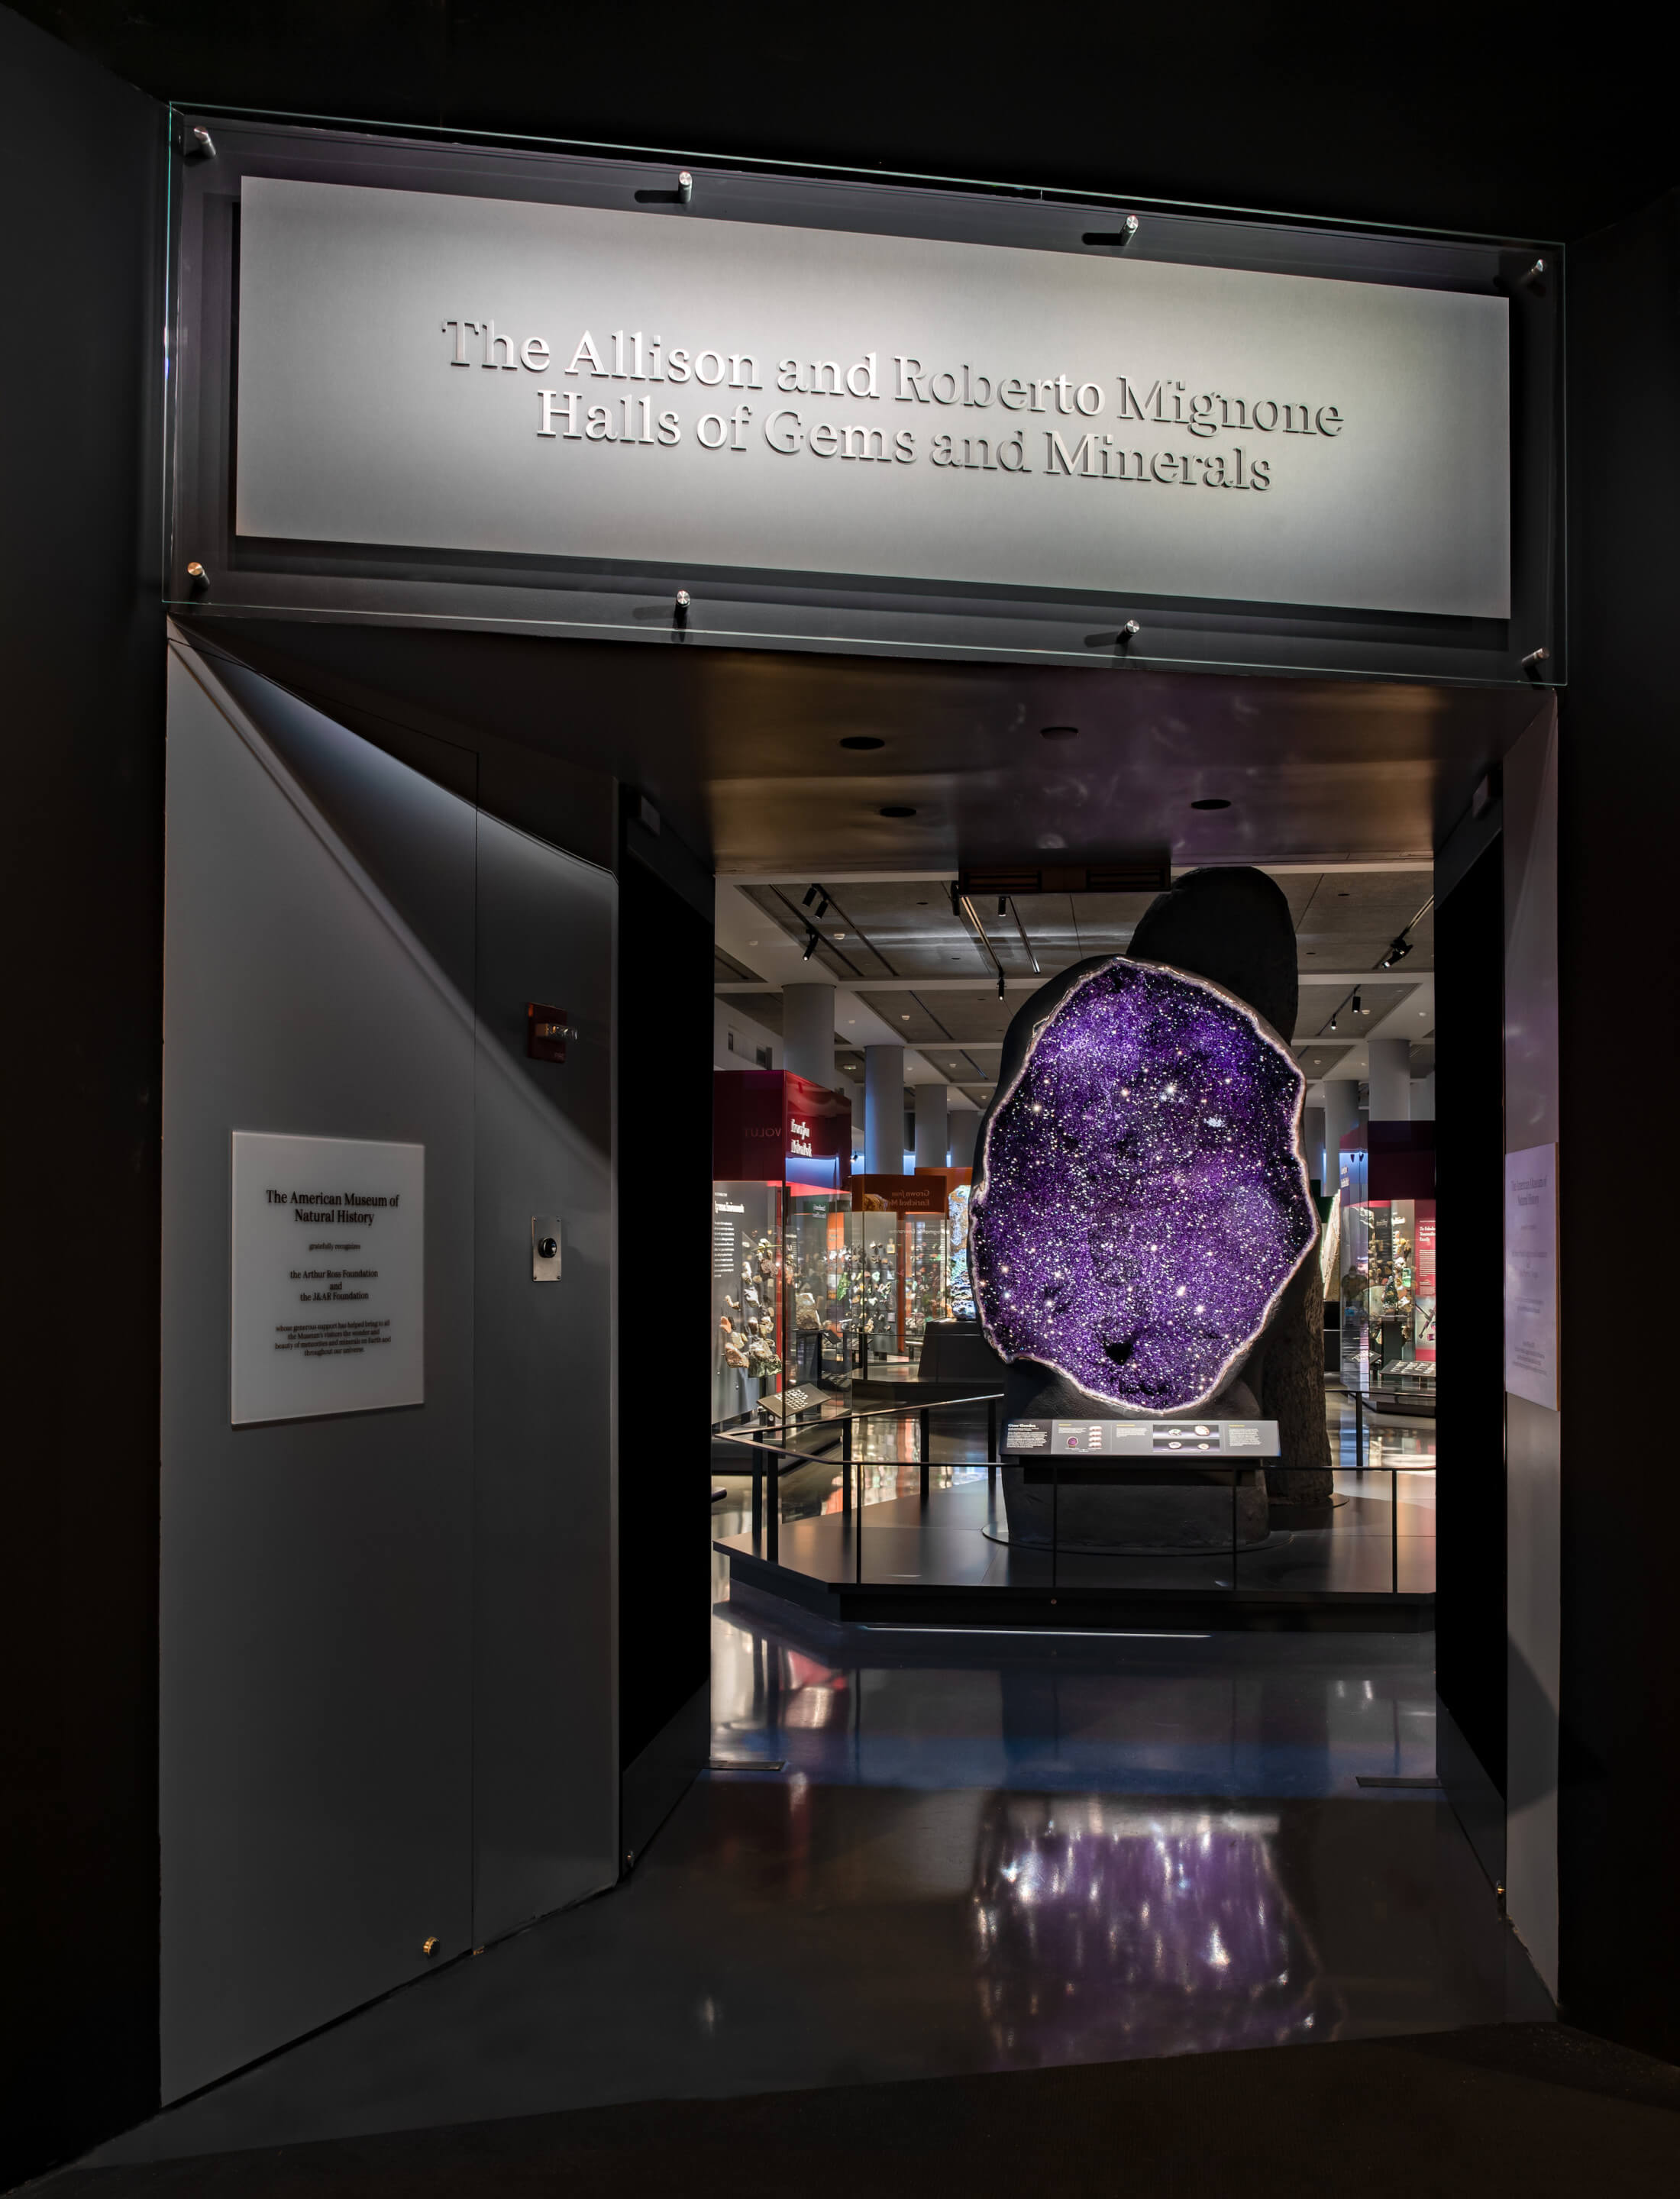 entrance to a museum hall displaying gems and minerals